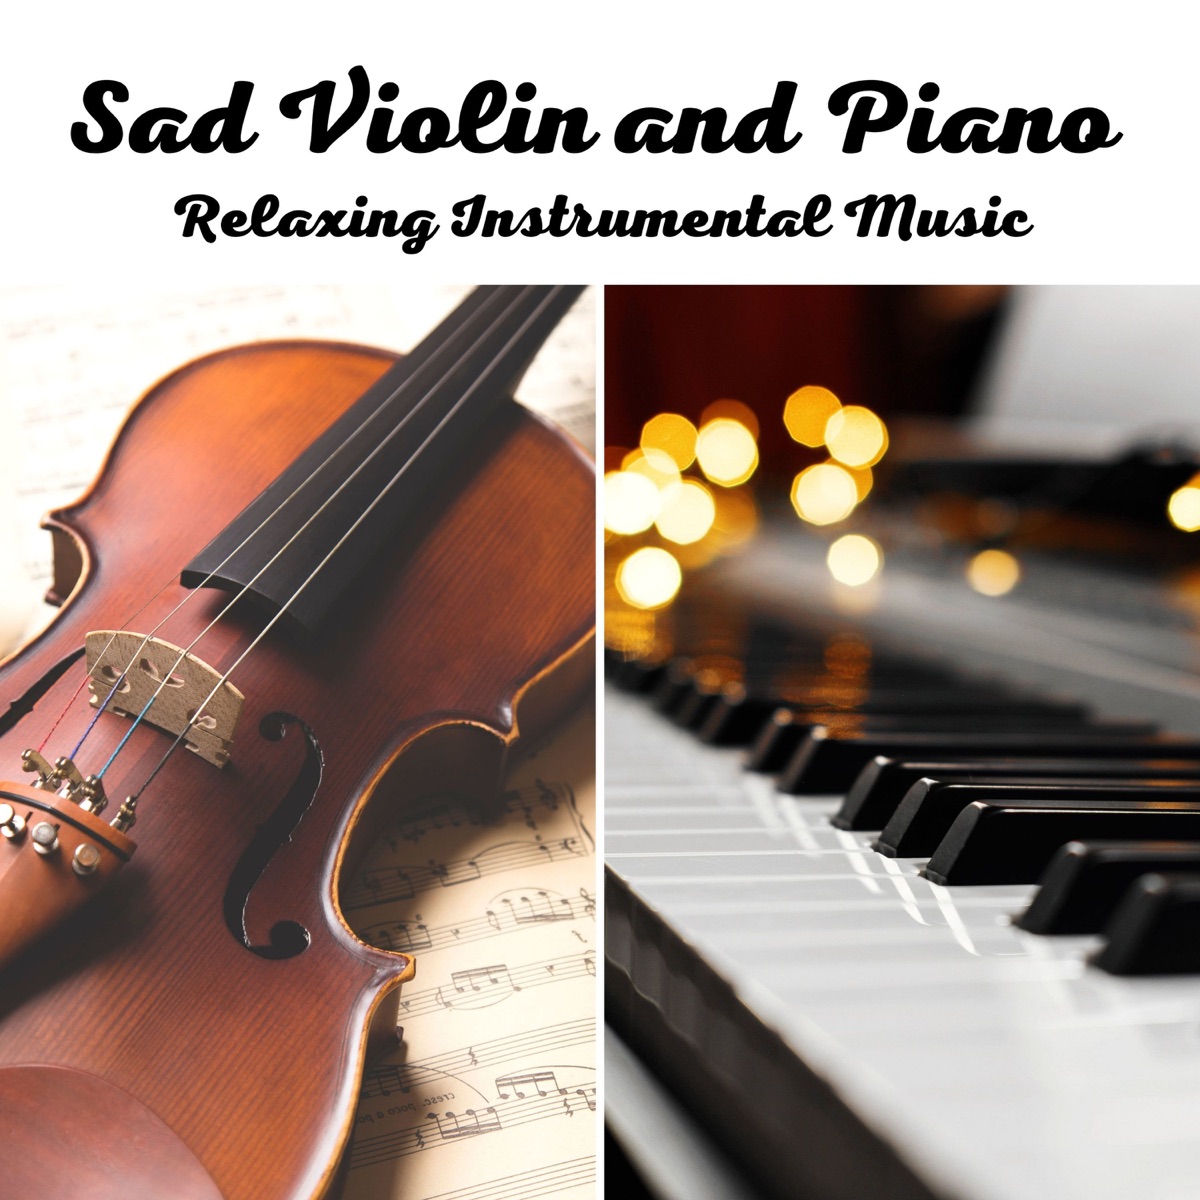 Sad Violin and Piano Relaxing Instrumental Music Volume 3 by Sad Piano and  Violin, Violin Music & Piano Instrumental on Apple Music